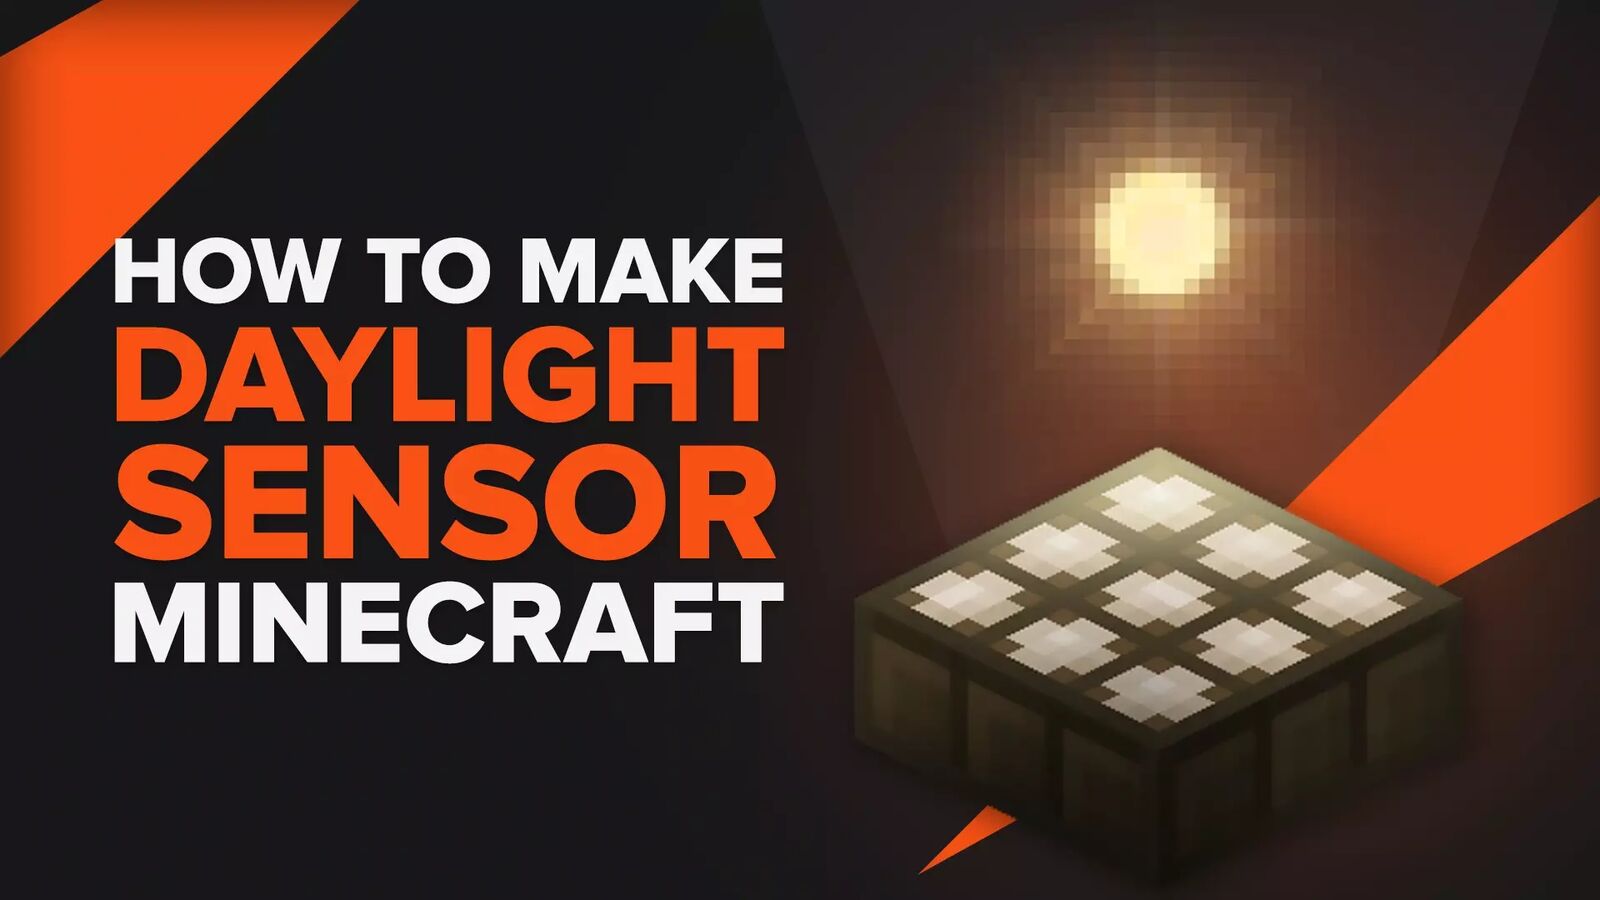 How to Make a Daylight Sensor in Minecraft [Complete Guide]